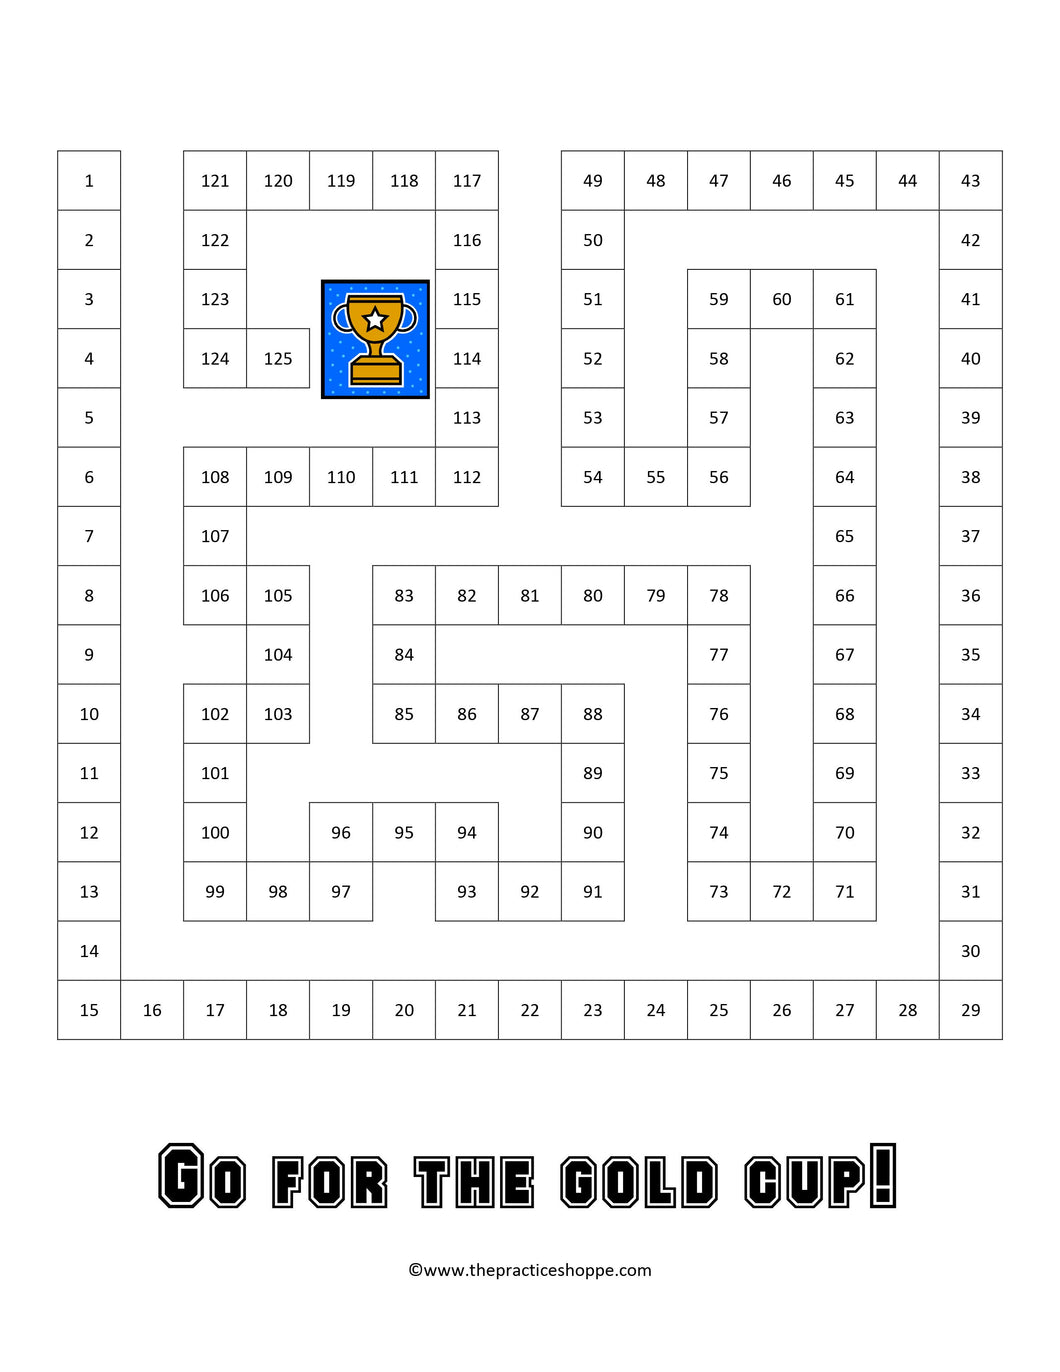 Go For the Gold Cup 125 (Digital Download)